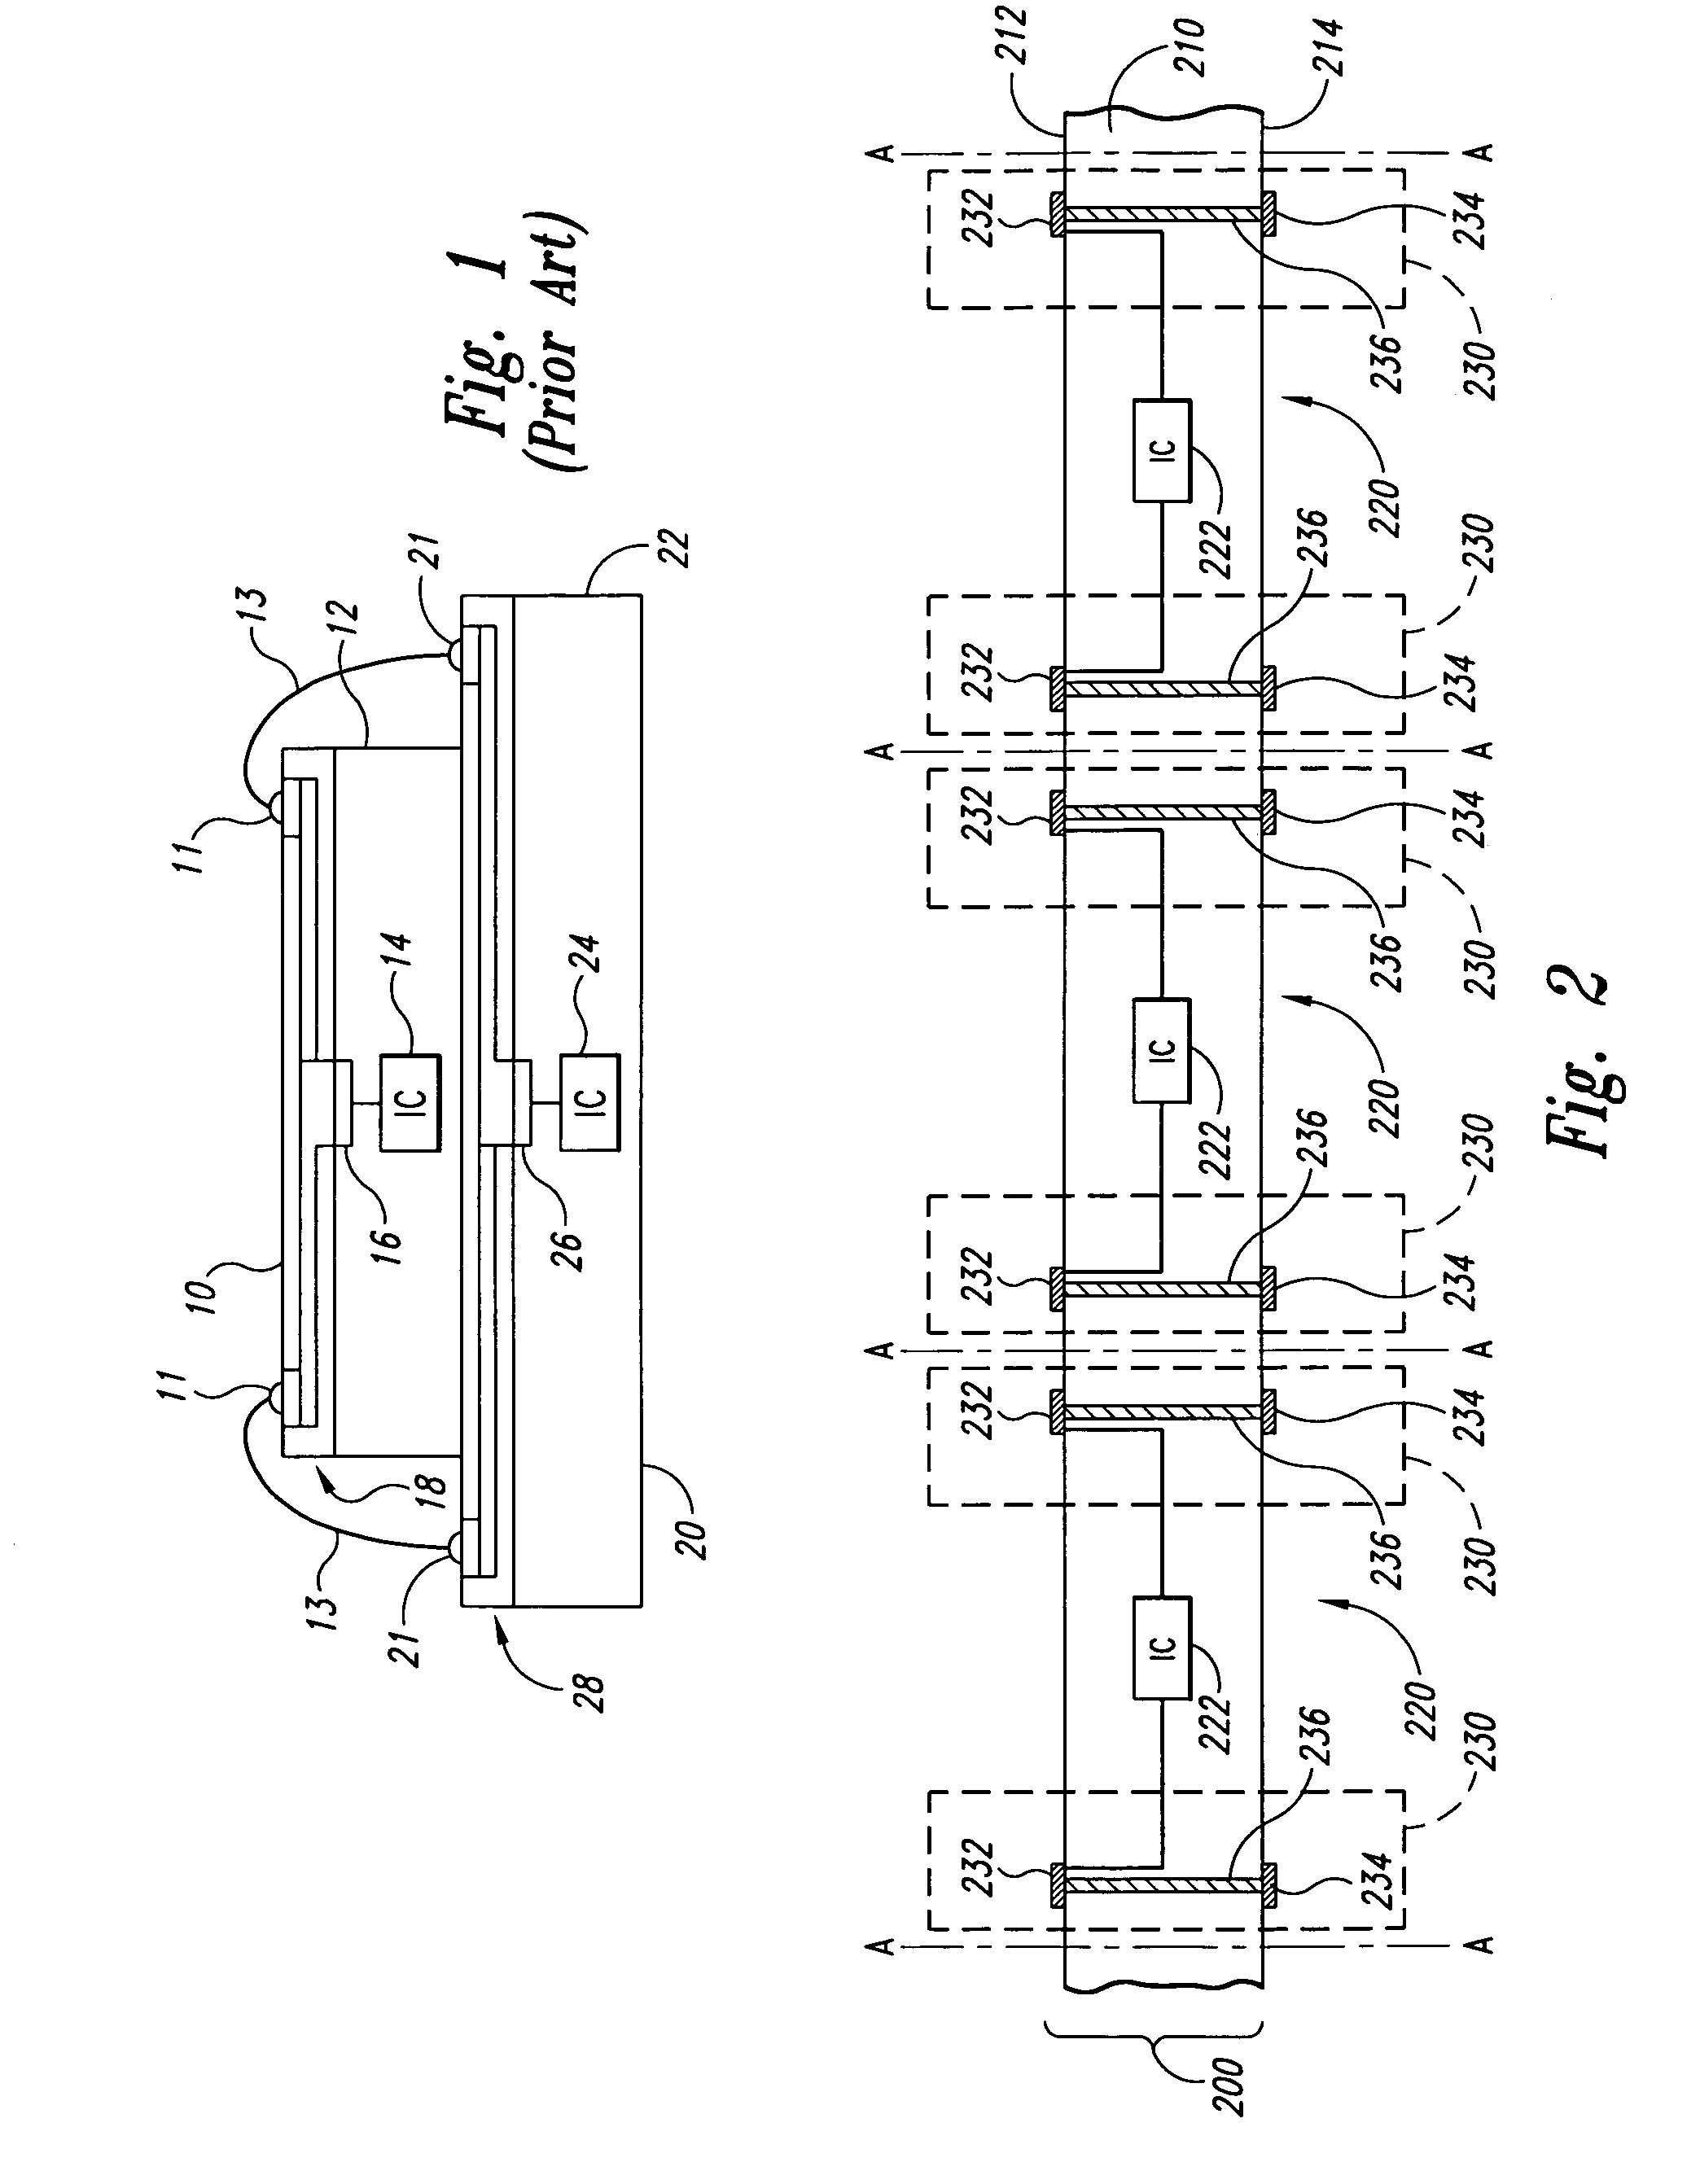 Methods for forming interconnects in microelectronic workpieces and microelectronic workpieces formed using such methods